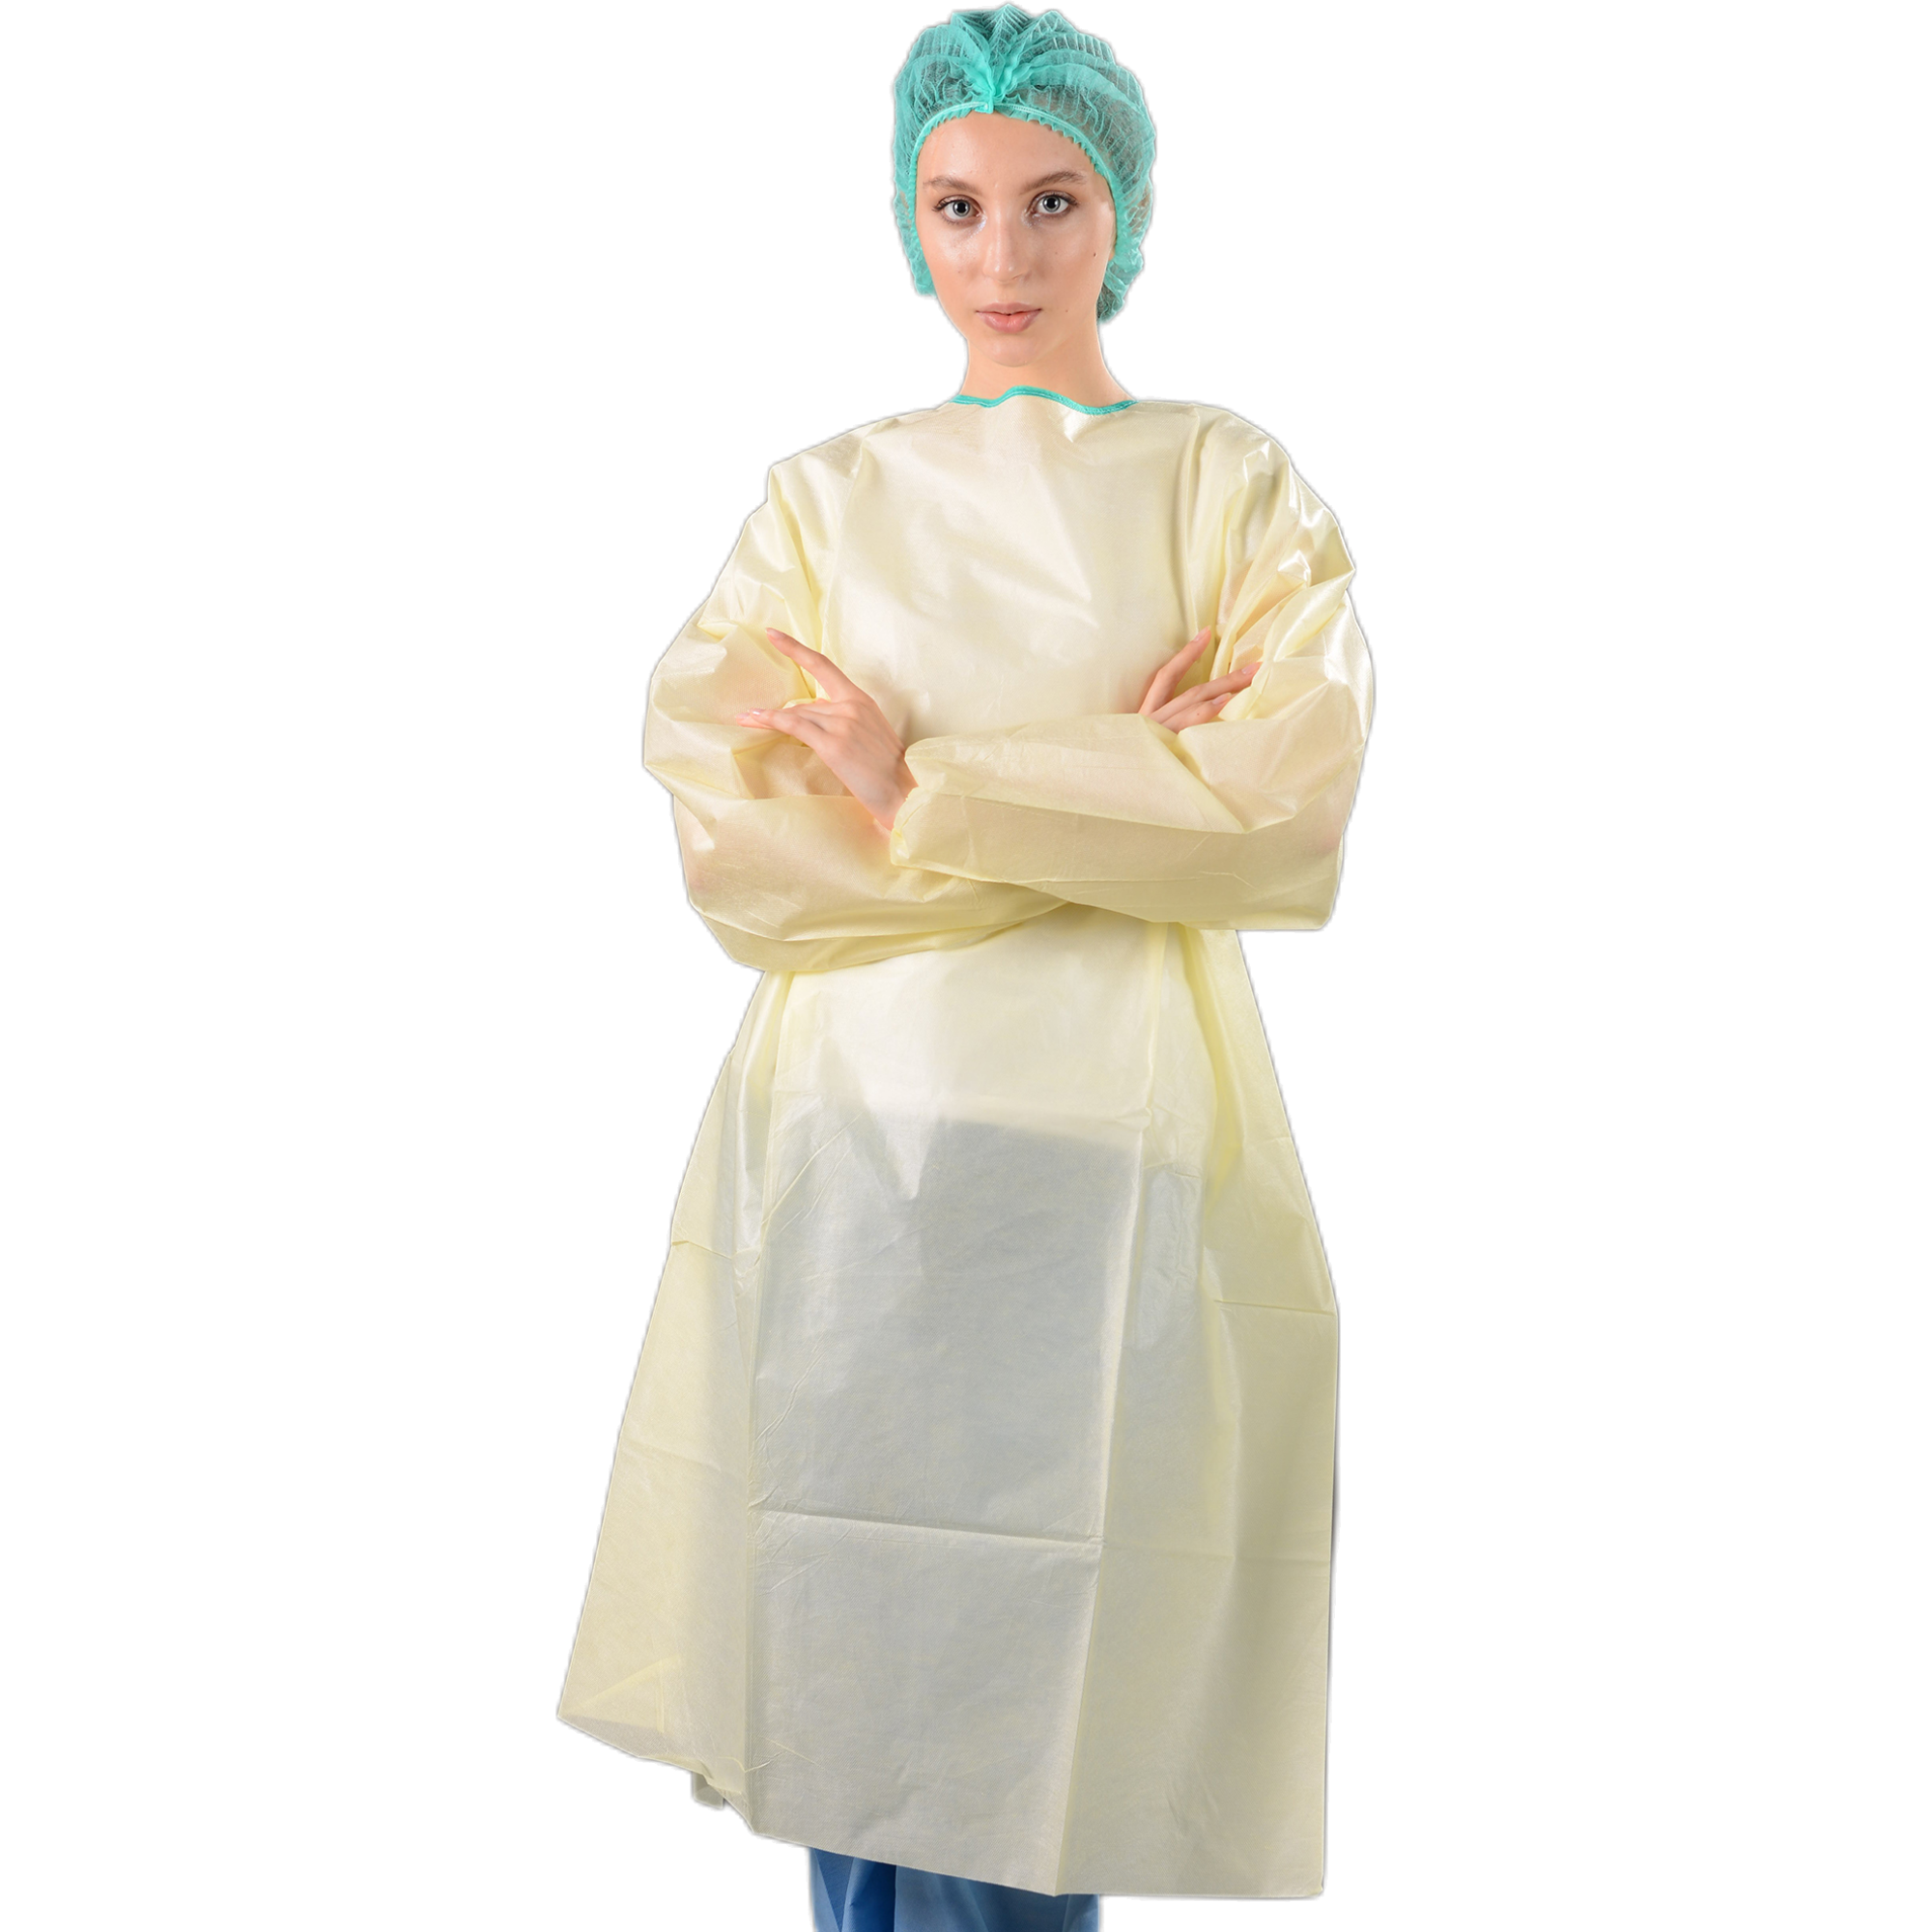 Nonwoven SBPP lightweight yellow isolation gowns 